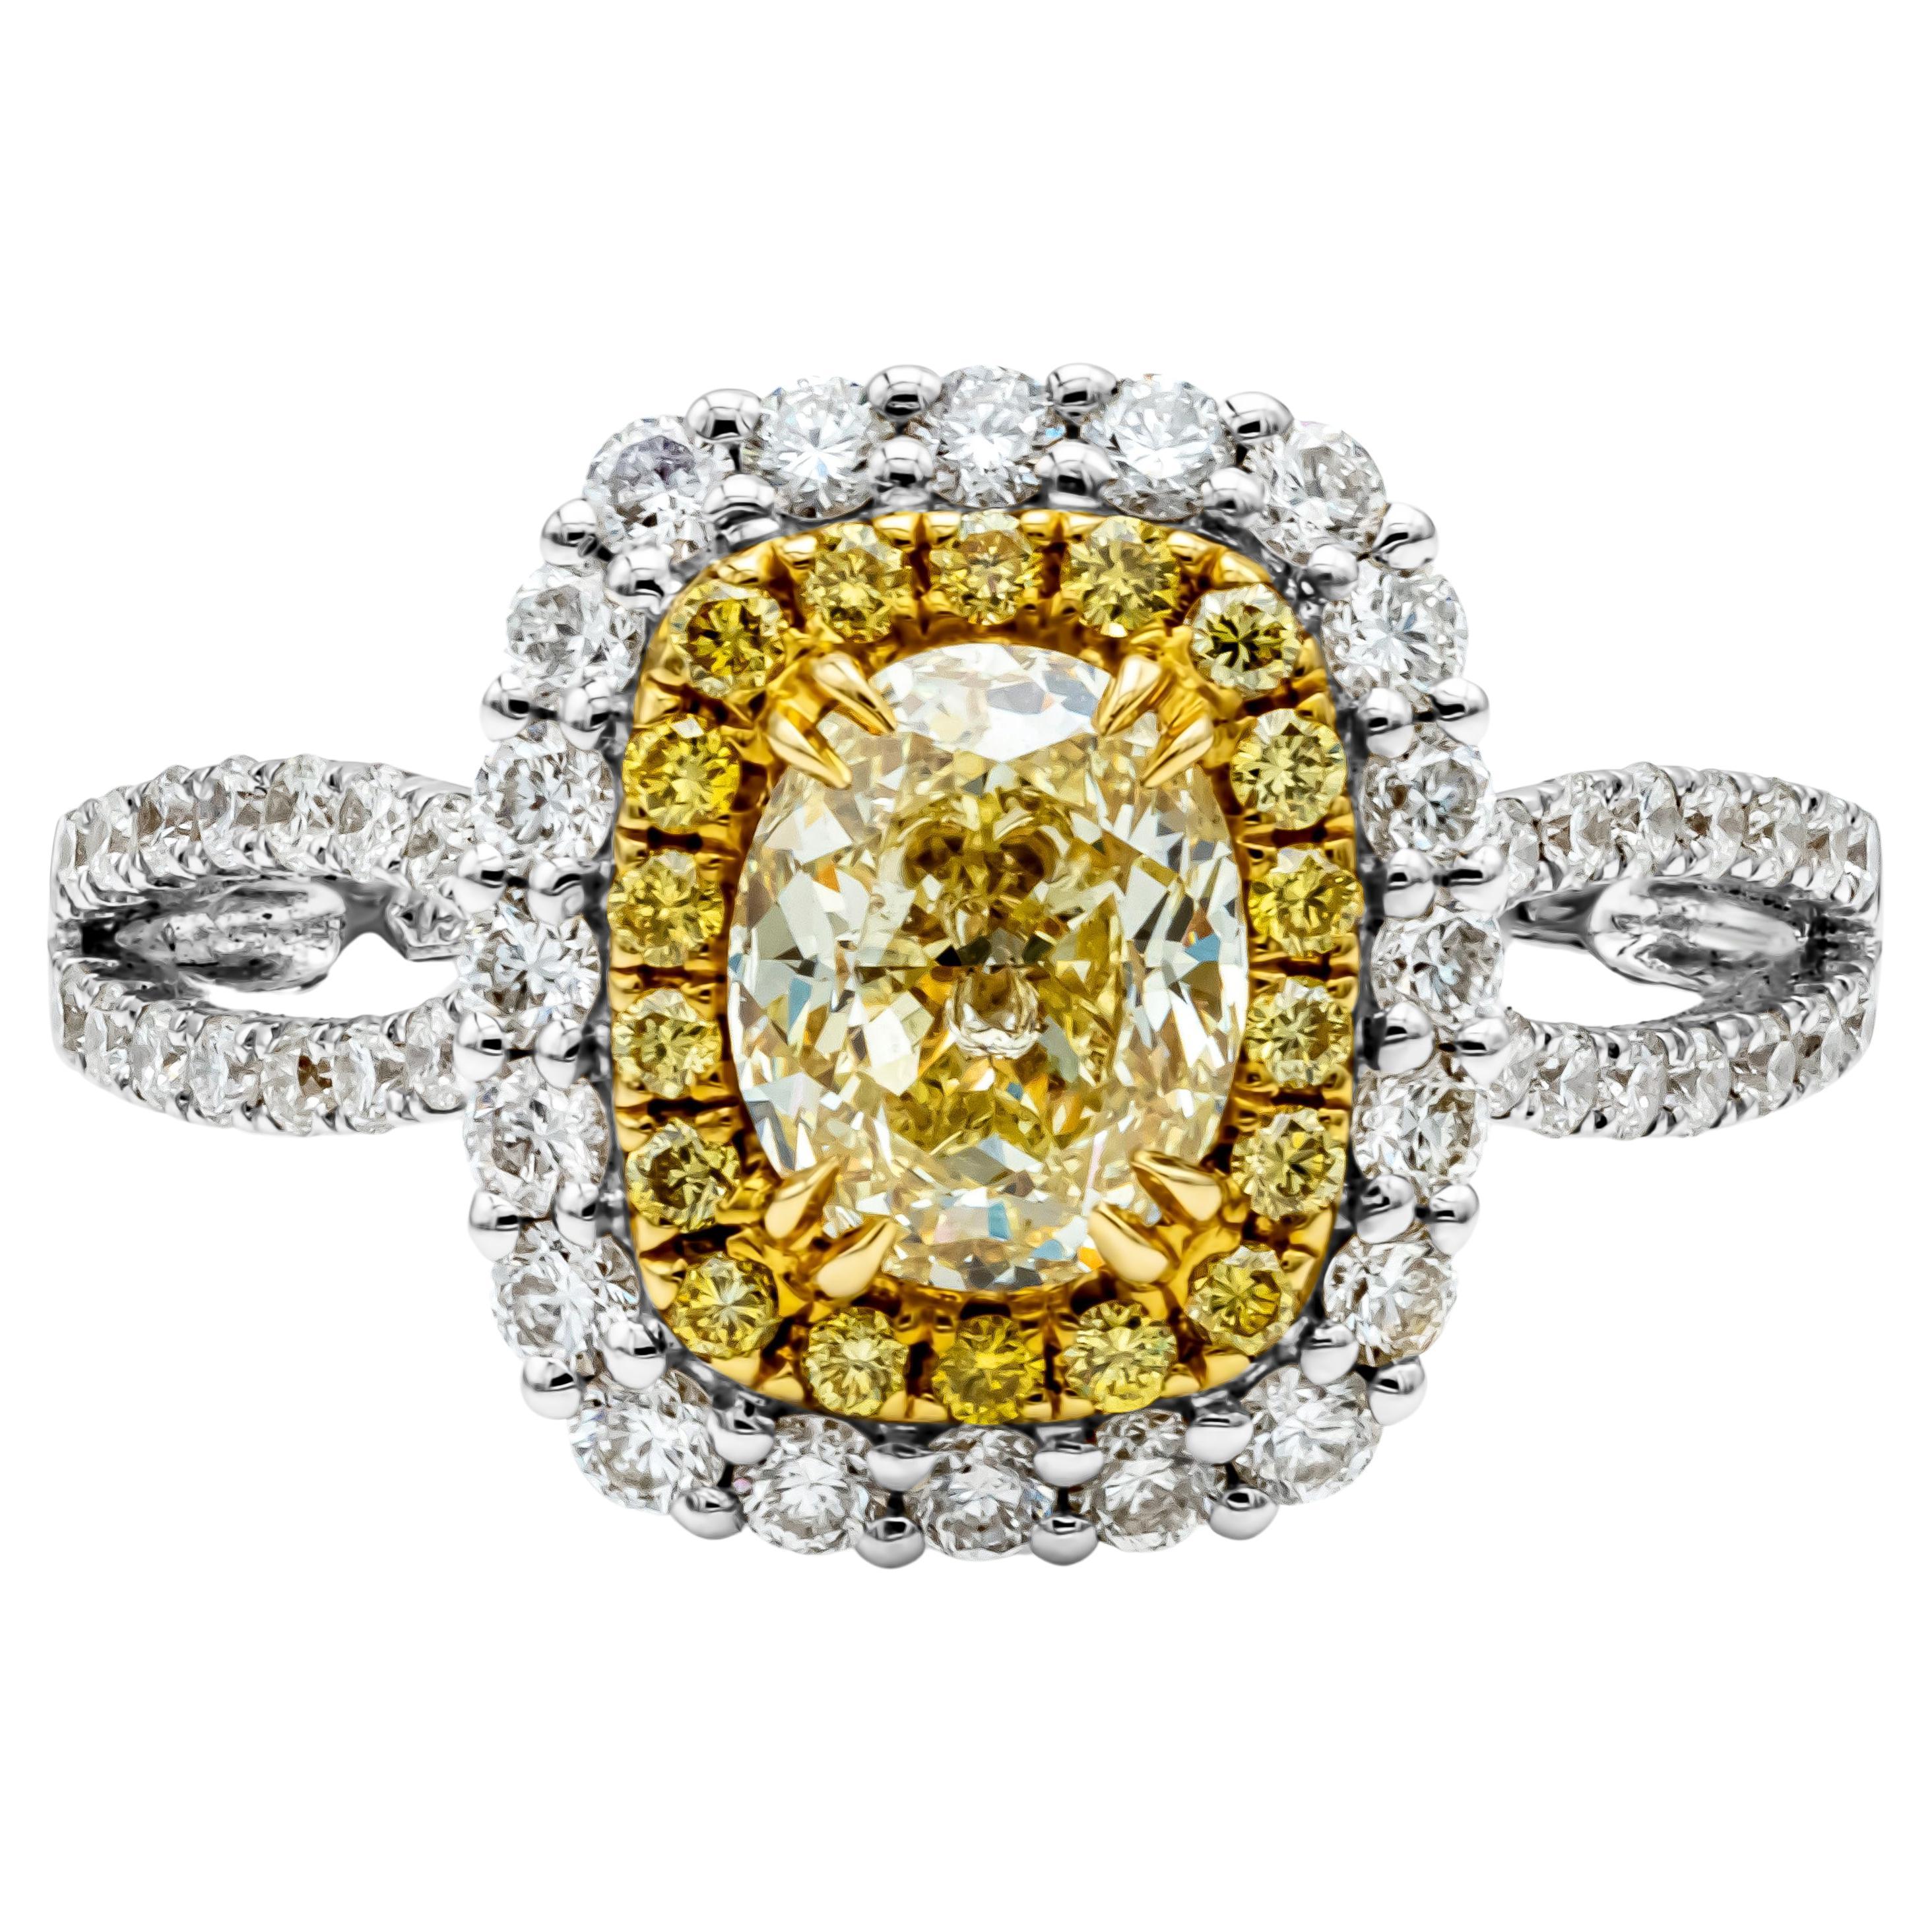 GIA Certified 1.17 Carats Oval Cut Fancy Light Yellow Diamond Engagement Ring For Sale